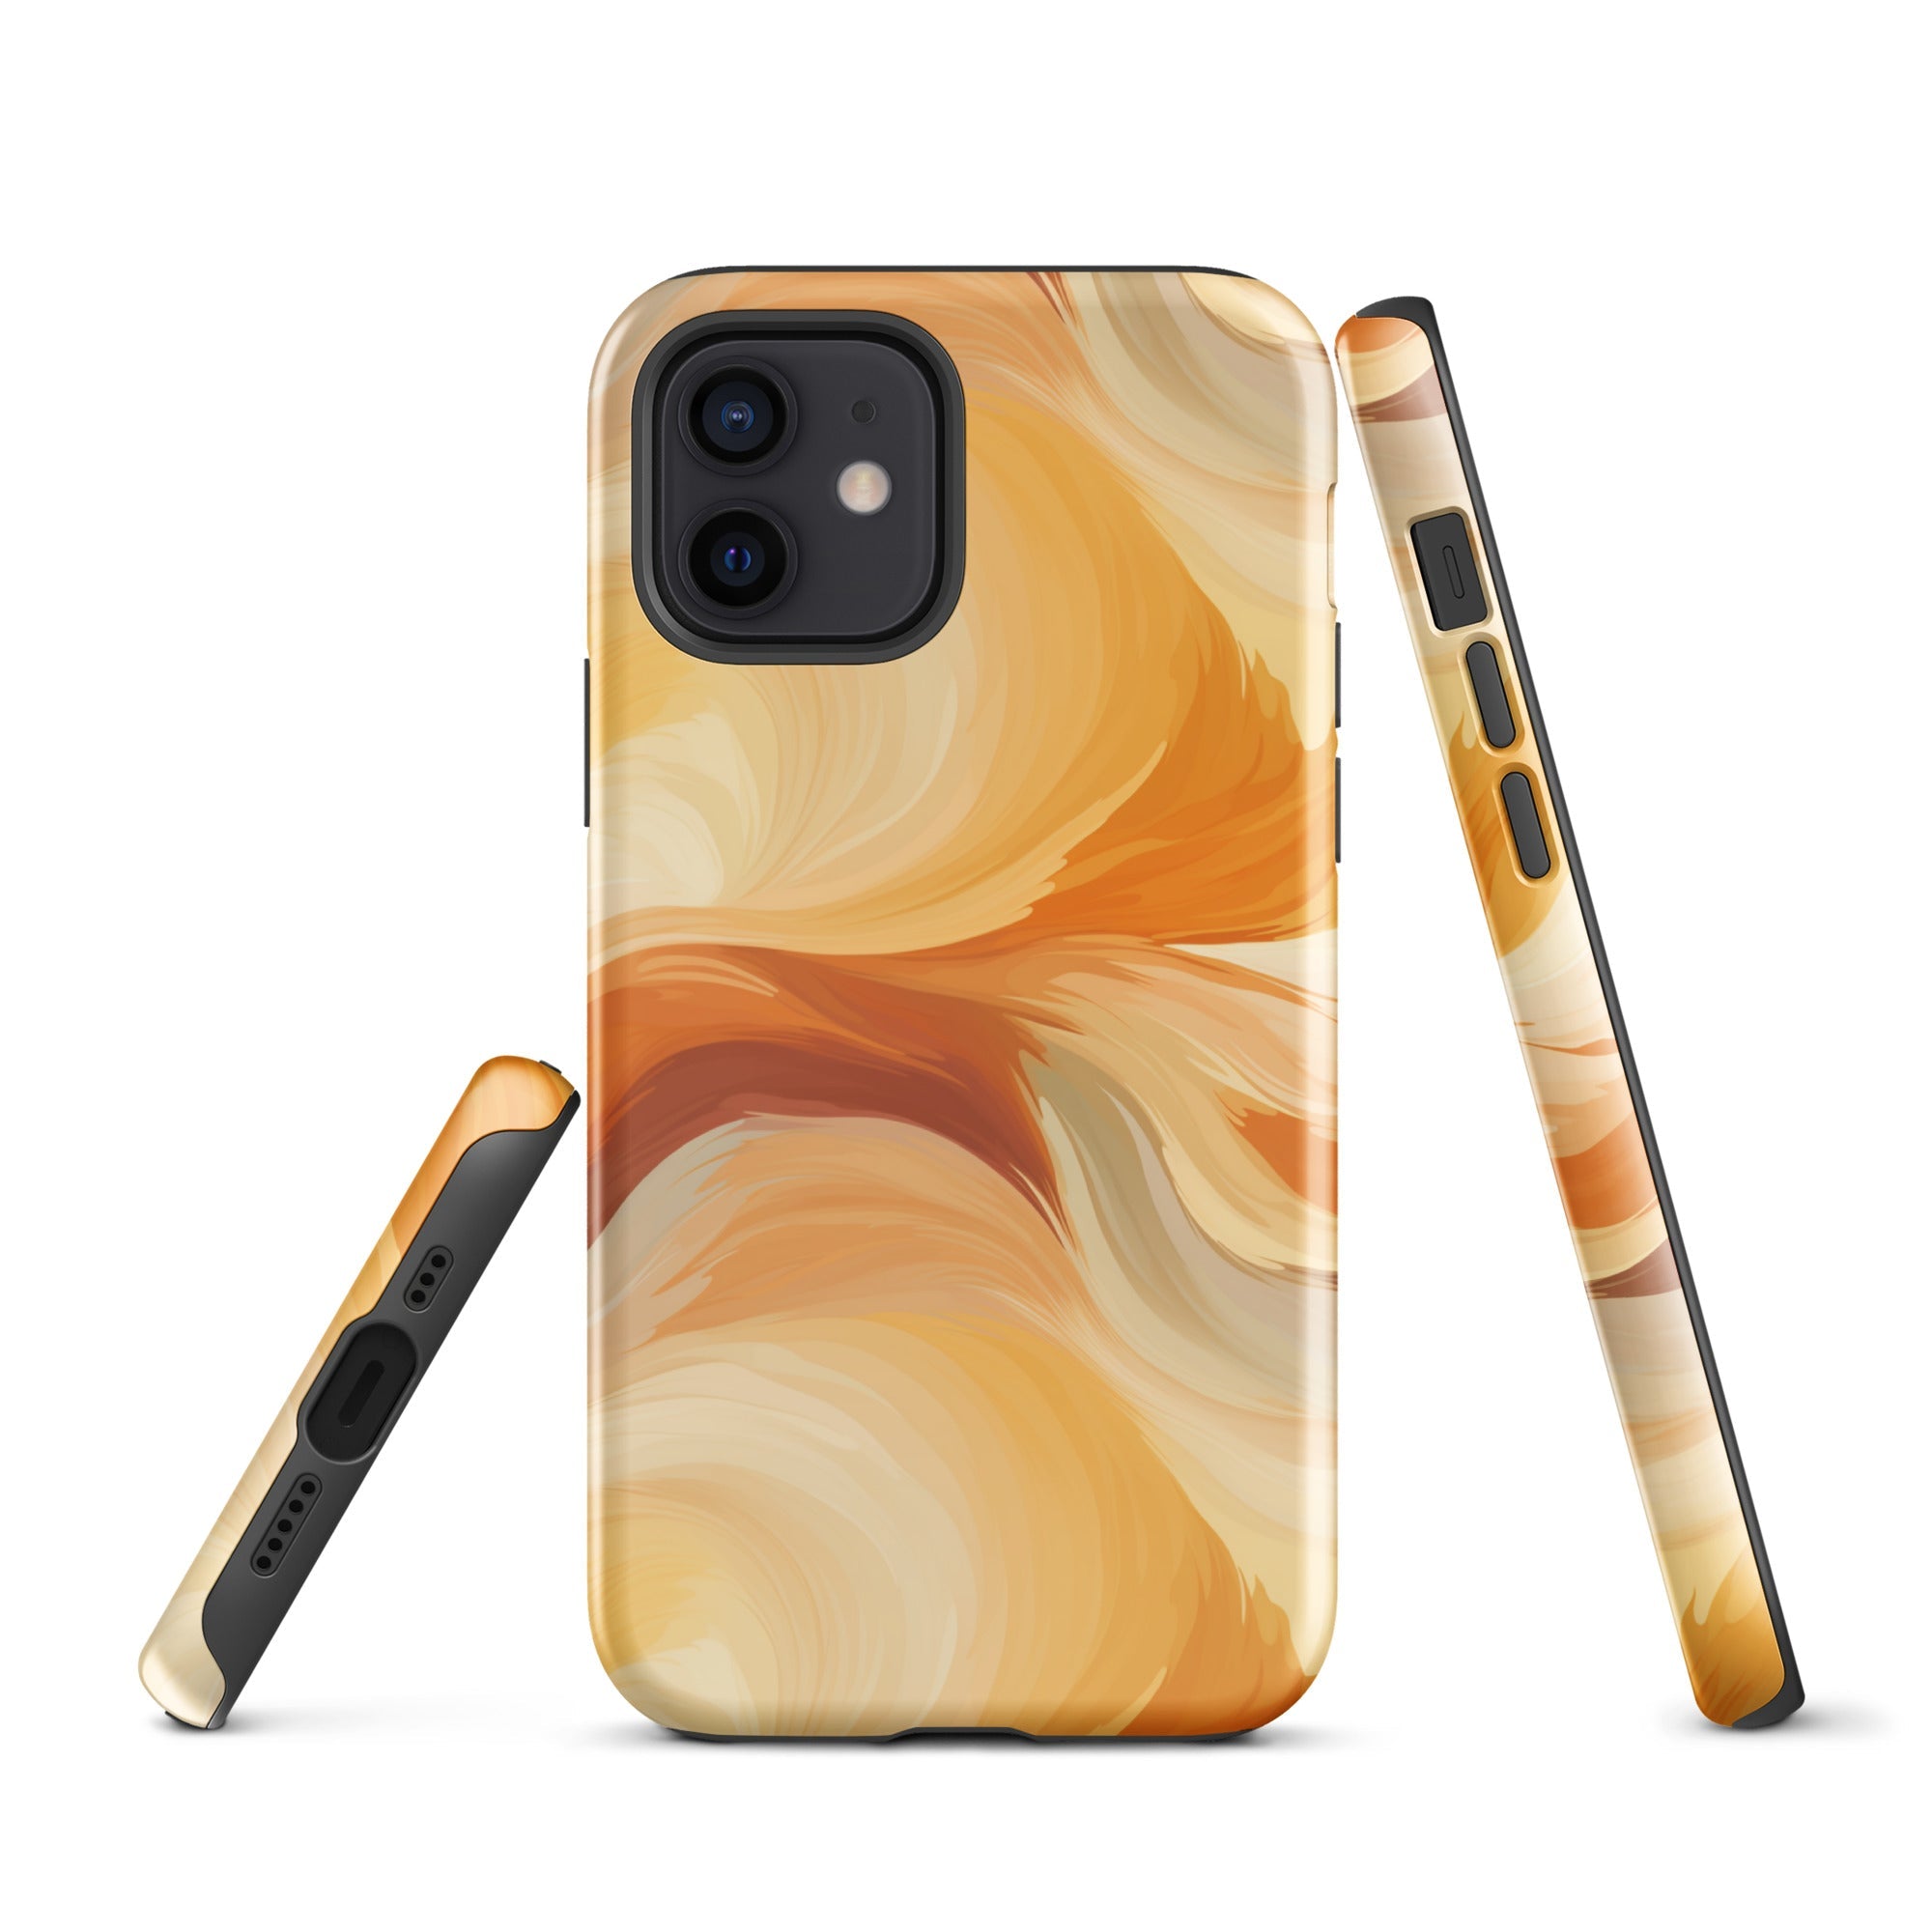 Amber Waves - The Breath of Autumn - iPhone Case - Pattern Symphony